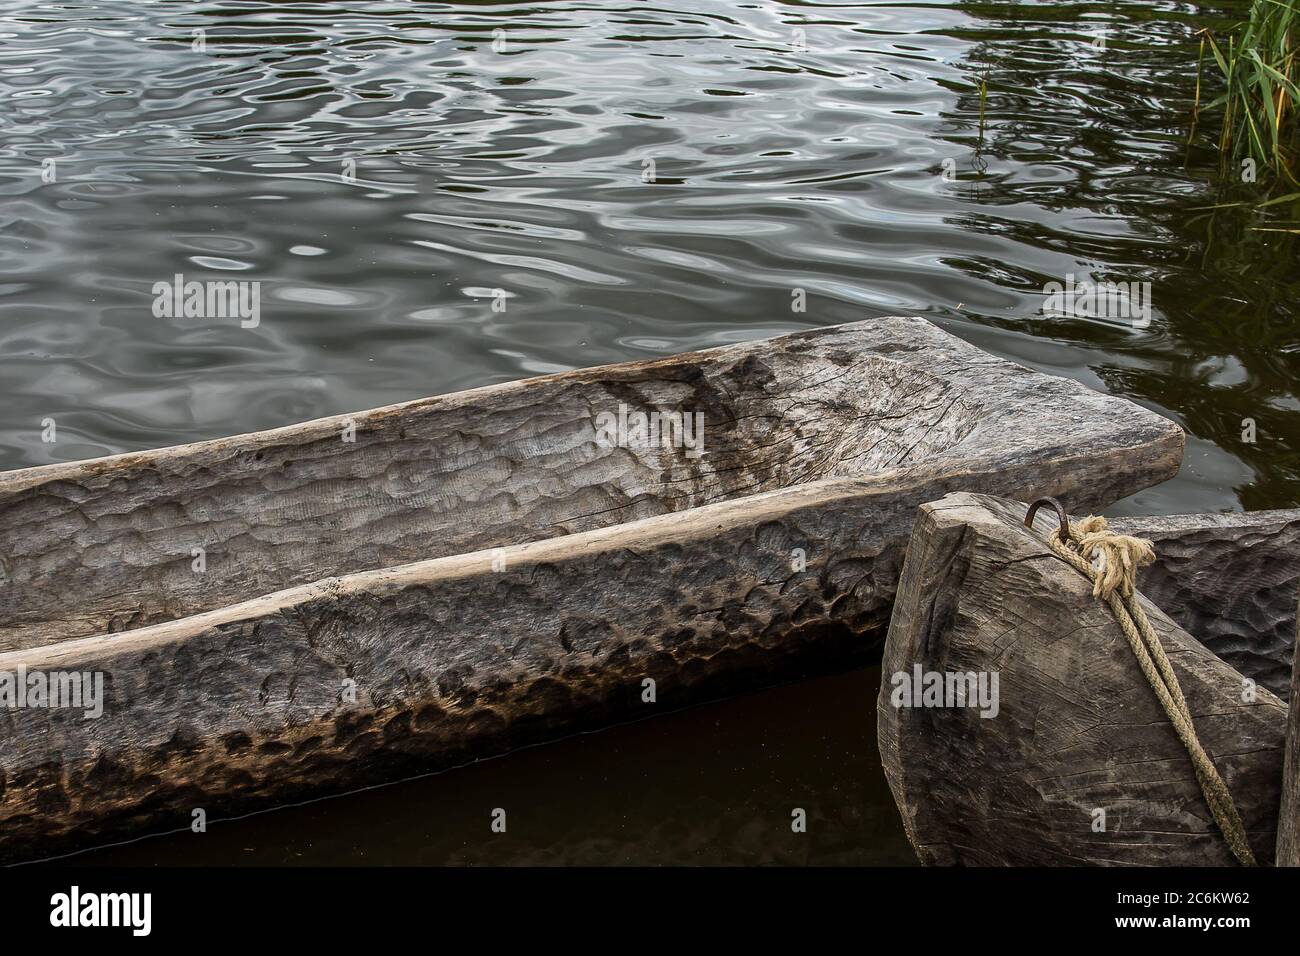 close-up of two dugout canoes made of old oak tree lying in the reflecting water, a Stone Age reconstruction, Lejre Denmark, July 9, 2020 Stock Photo